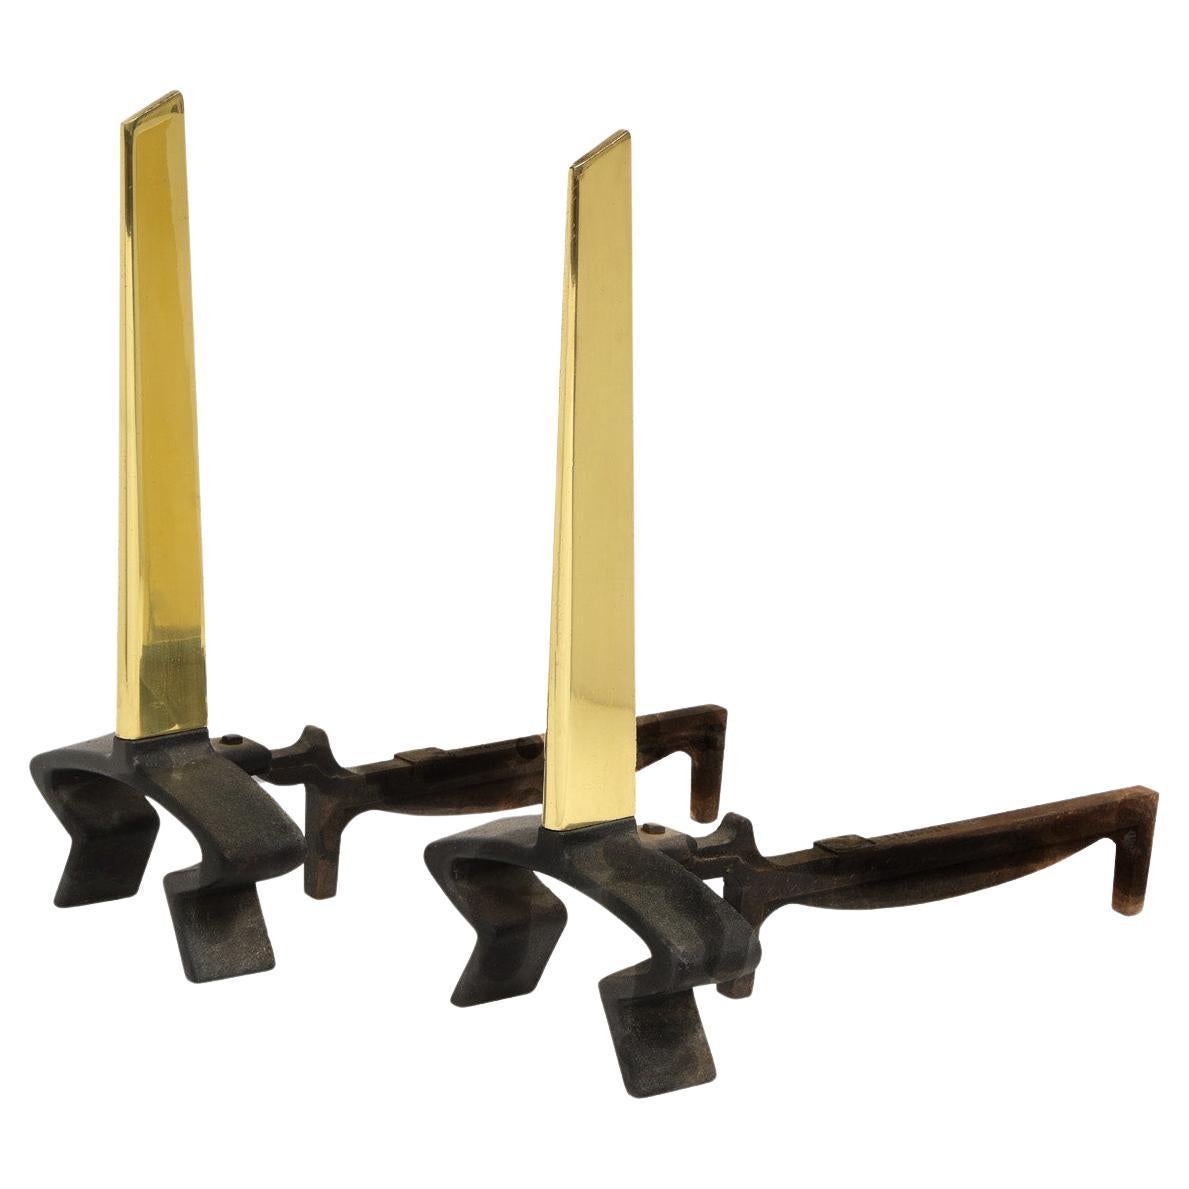 Donald Deskey Pair of Andirons in Wrought Iron and Brass 1950s (Signed) For Sale